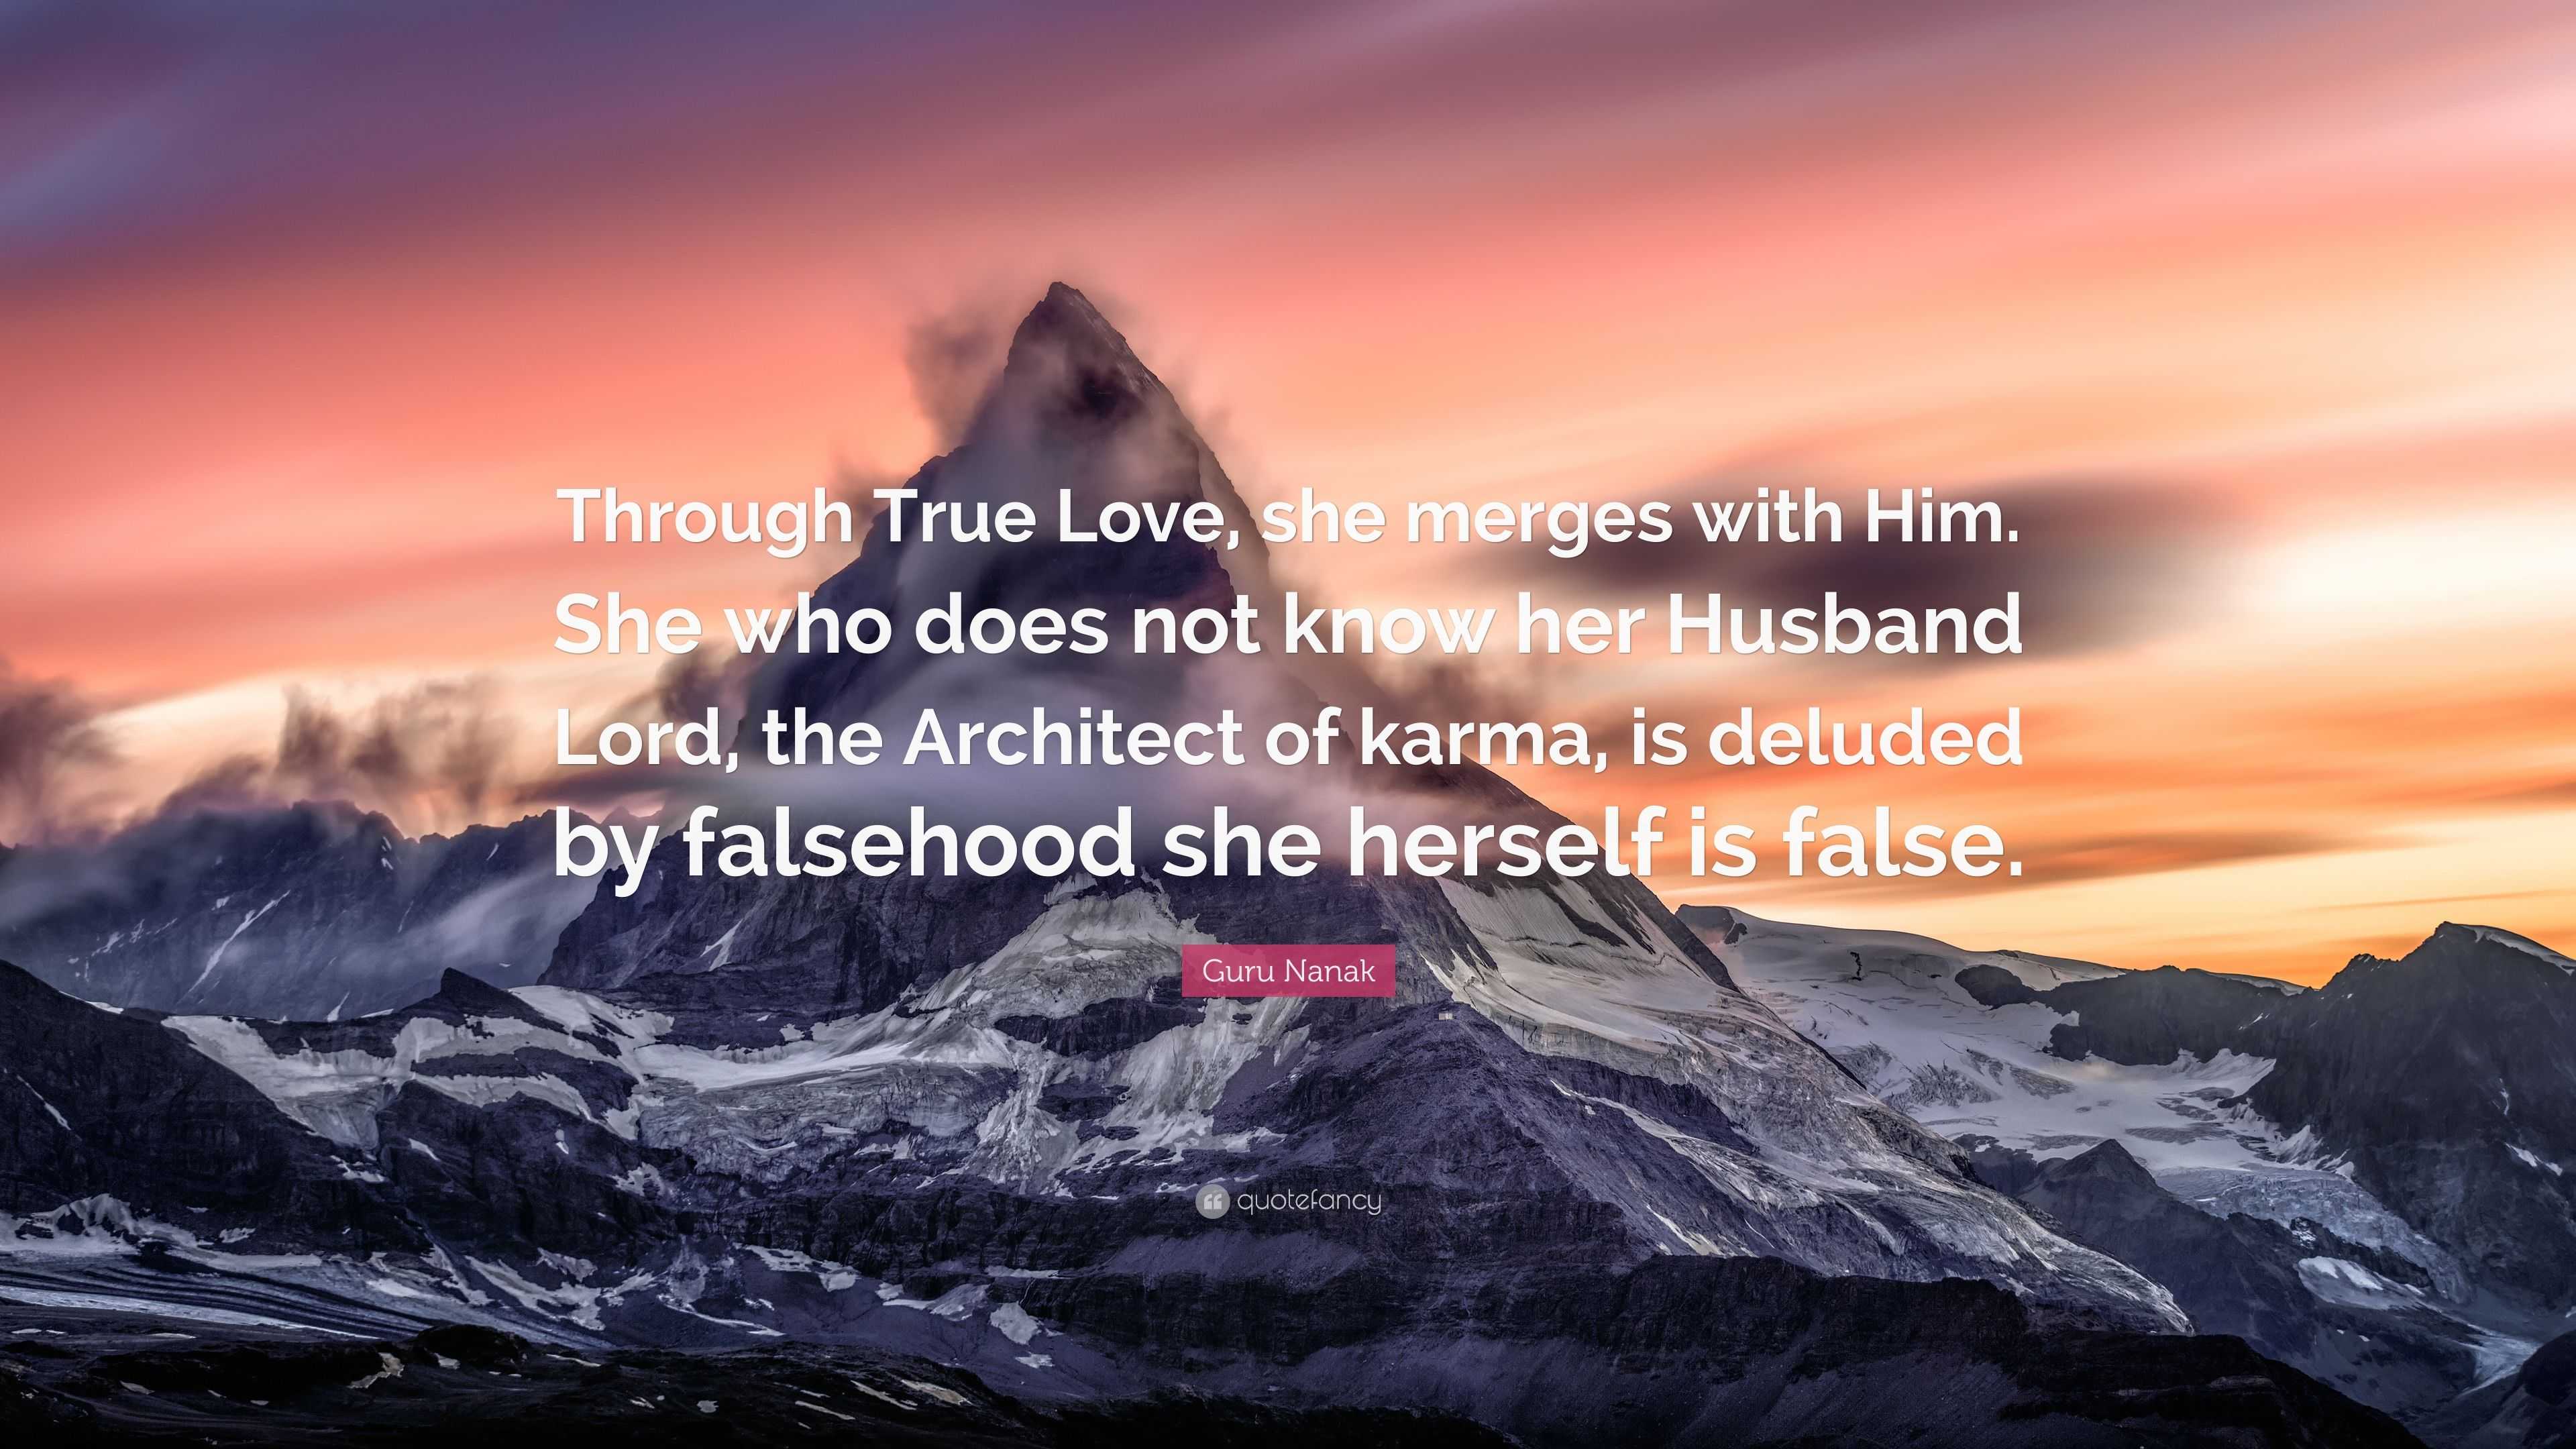 Guru Nanak Quote: “Through True Love, she merges with Him. She who does not  know her Husband Lord, the Architect of karma, is deluded by fa”